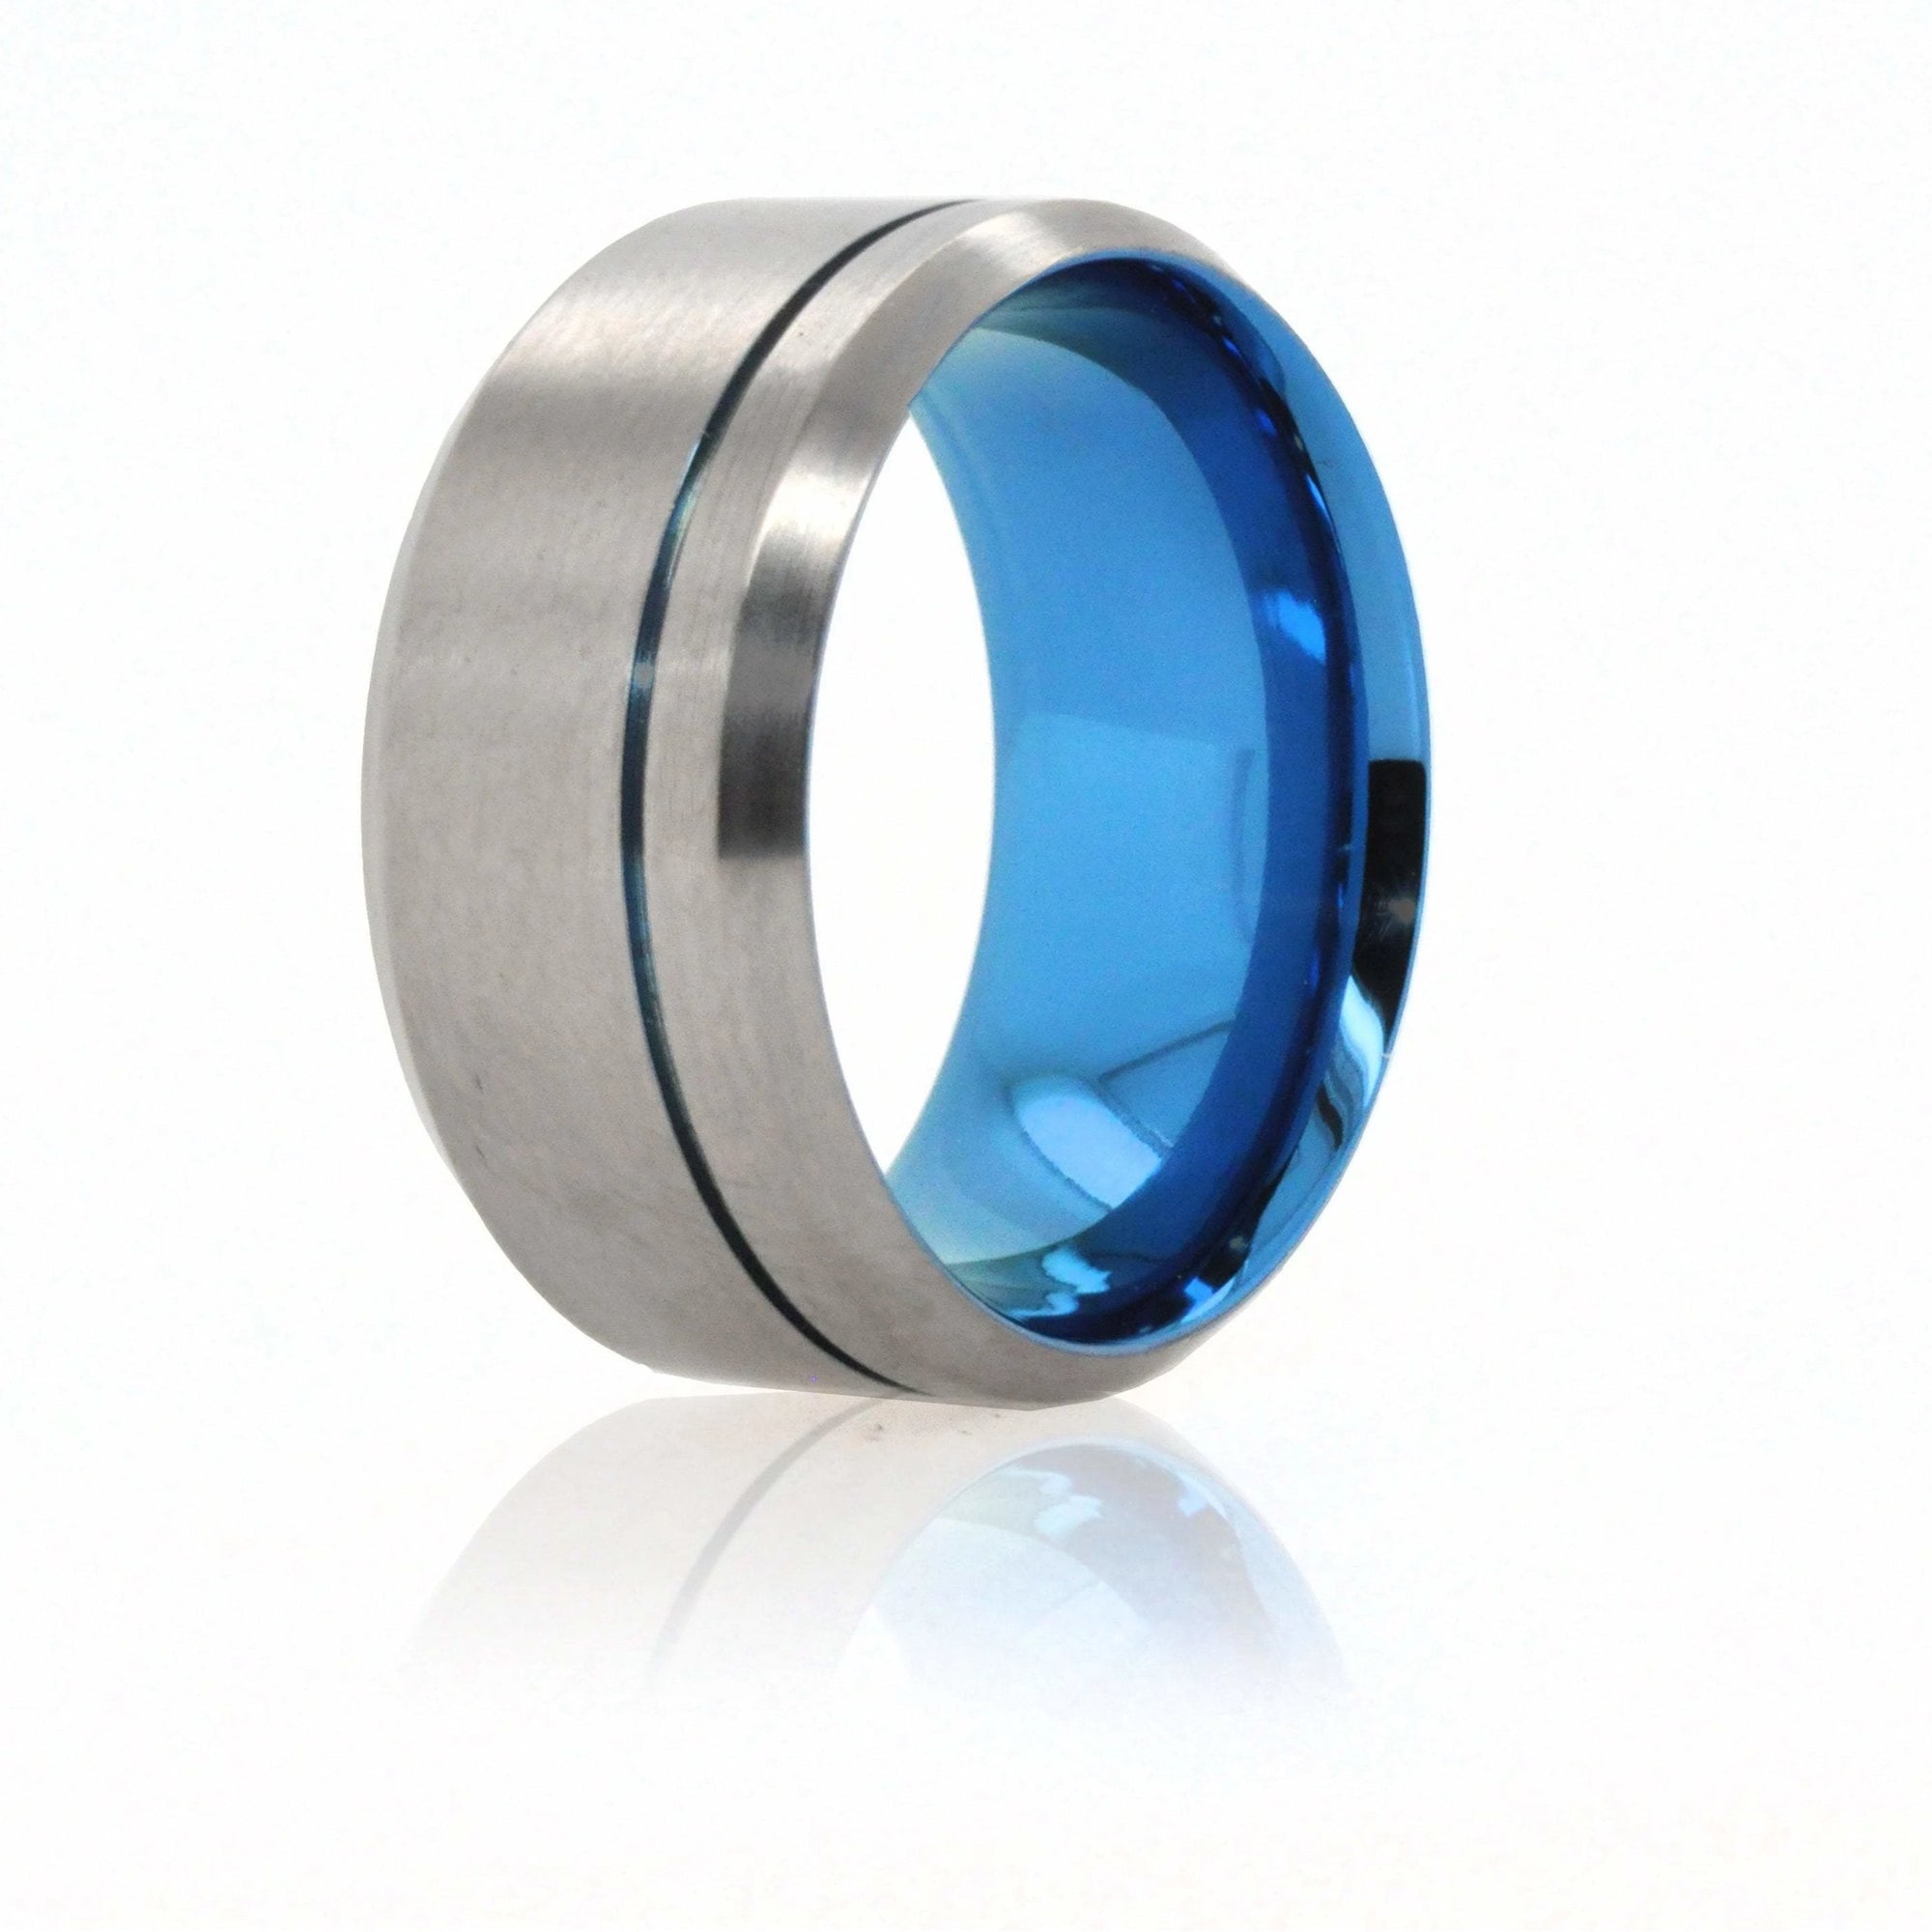 Wedding Band - Solid Titanium Exterior with an Anodized Titanium Interior. Handmade by Carbon6 Rings. 